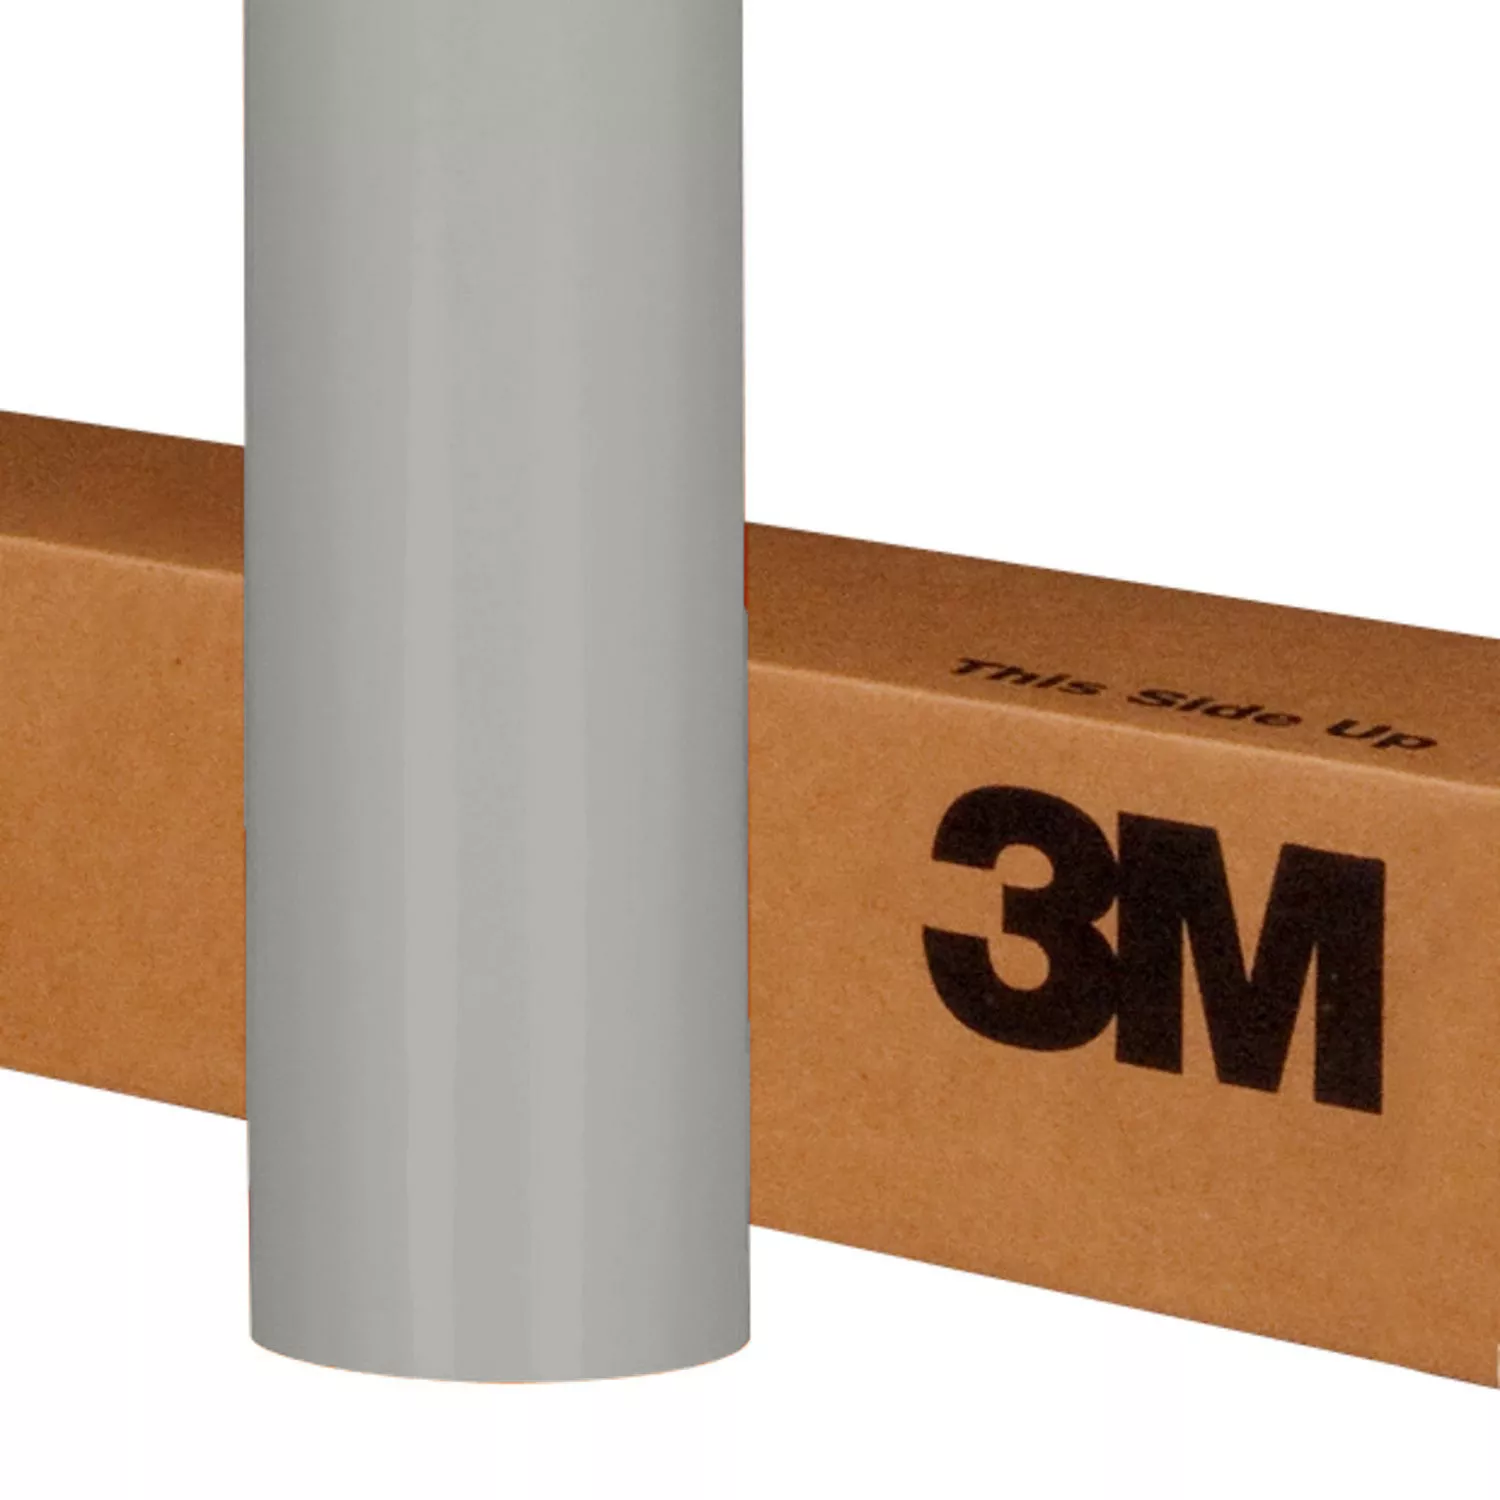 3M™ Scotchcal™ ElectroCut™ Graphic Film 7725-61, Mid Gray, 48 in x 50 yd